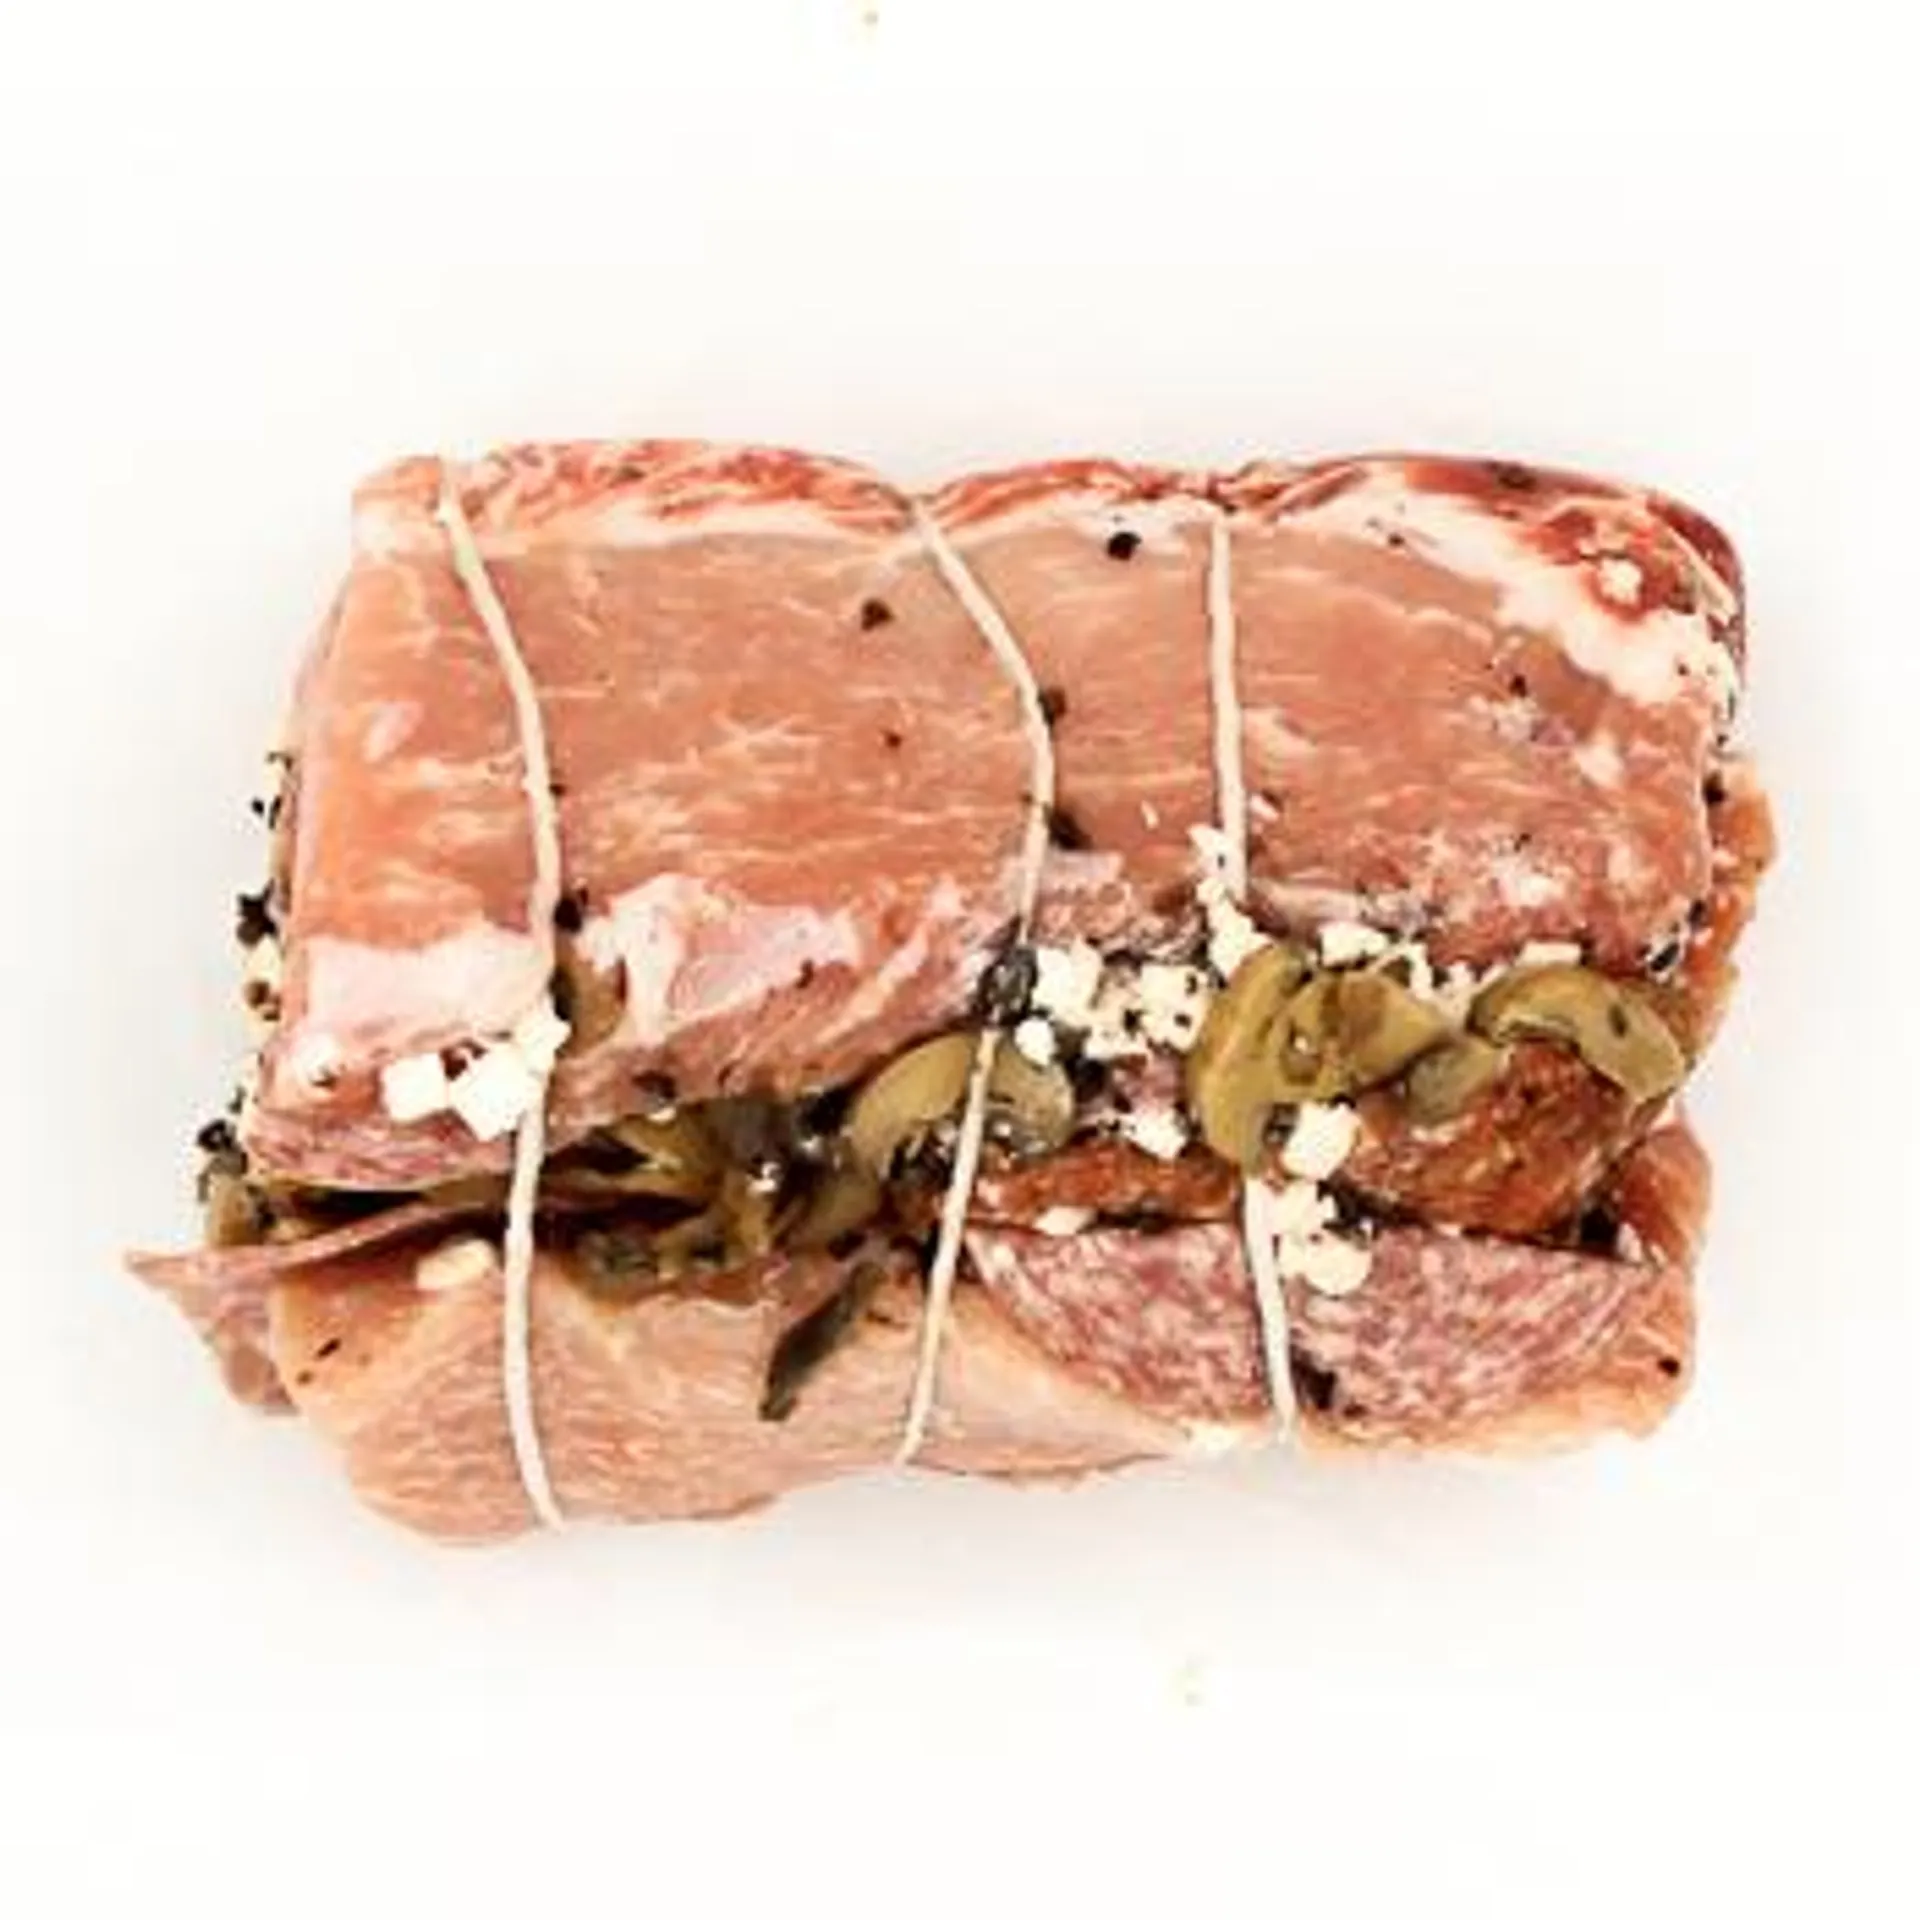 Al Capone Pork Roast - From Our Service Counter